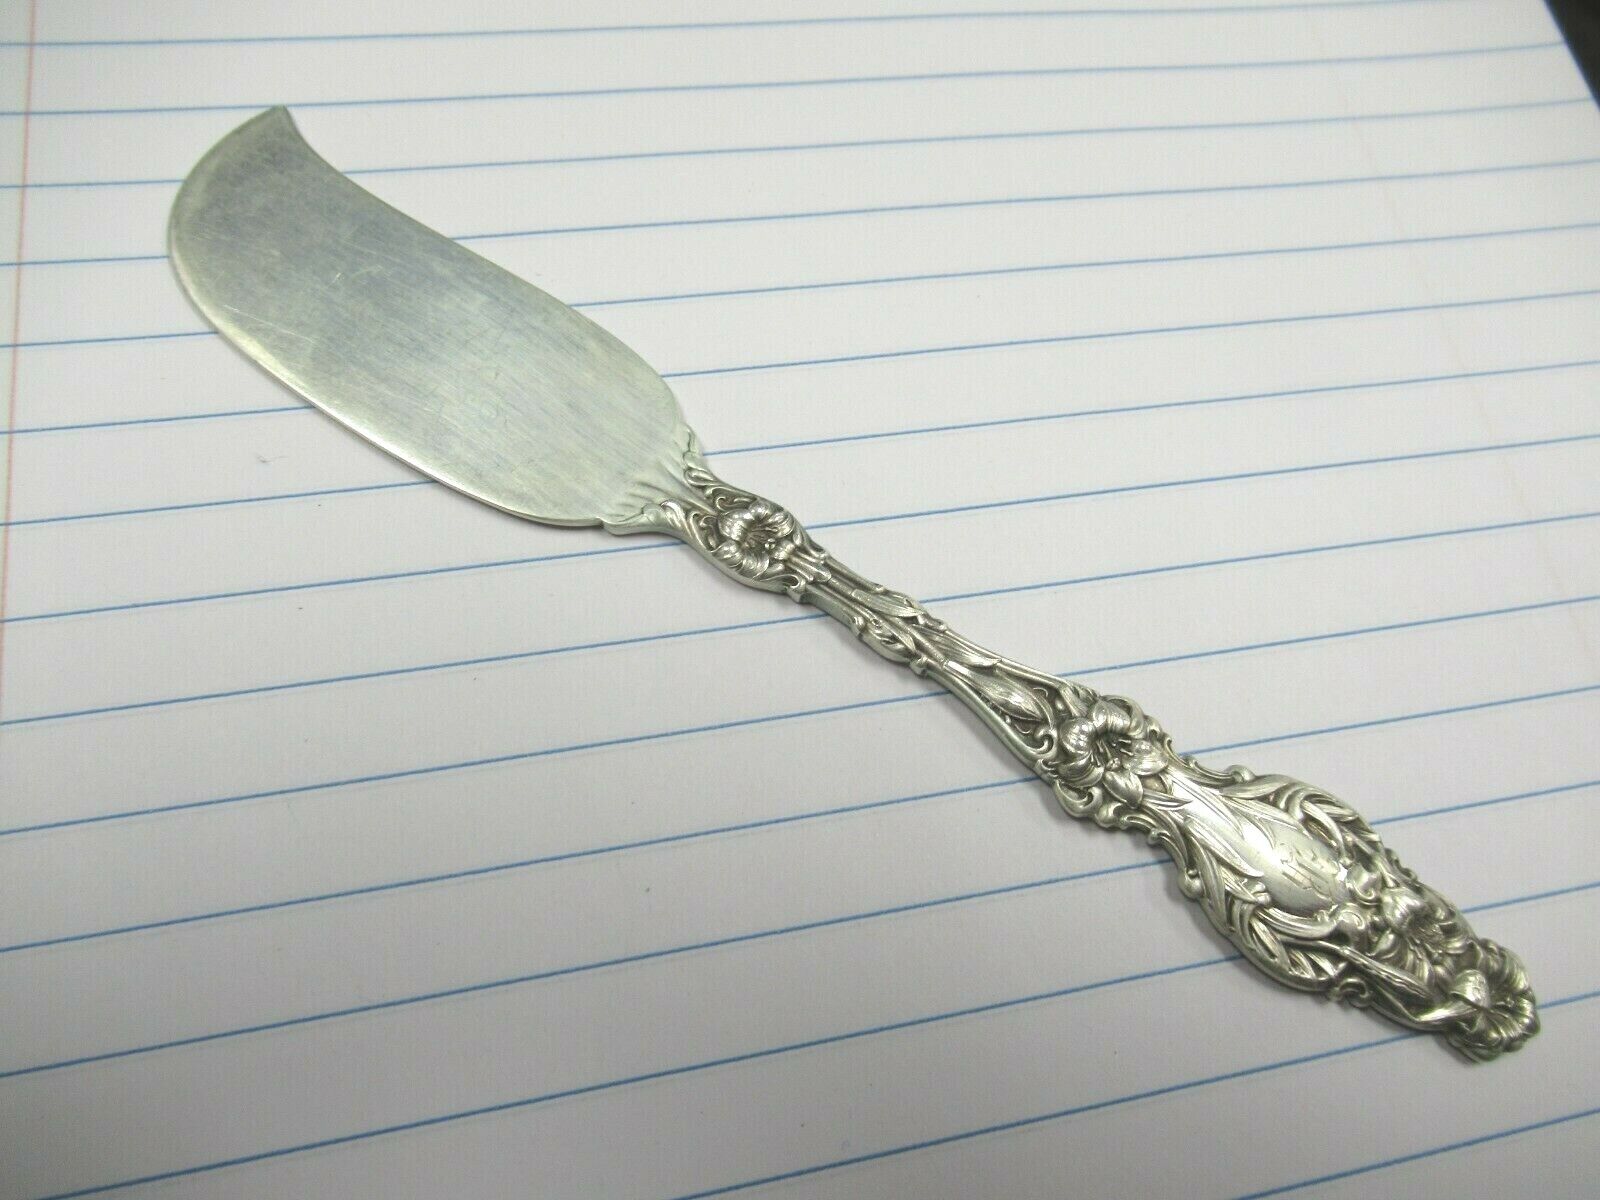 Pat 1902 Whiting Lily Sterling Silver Flat Butter Knife Spreader Nice BIN Price!